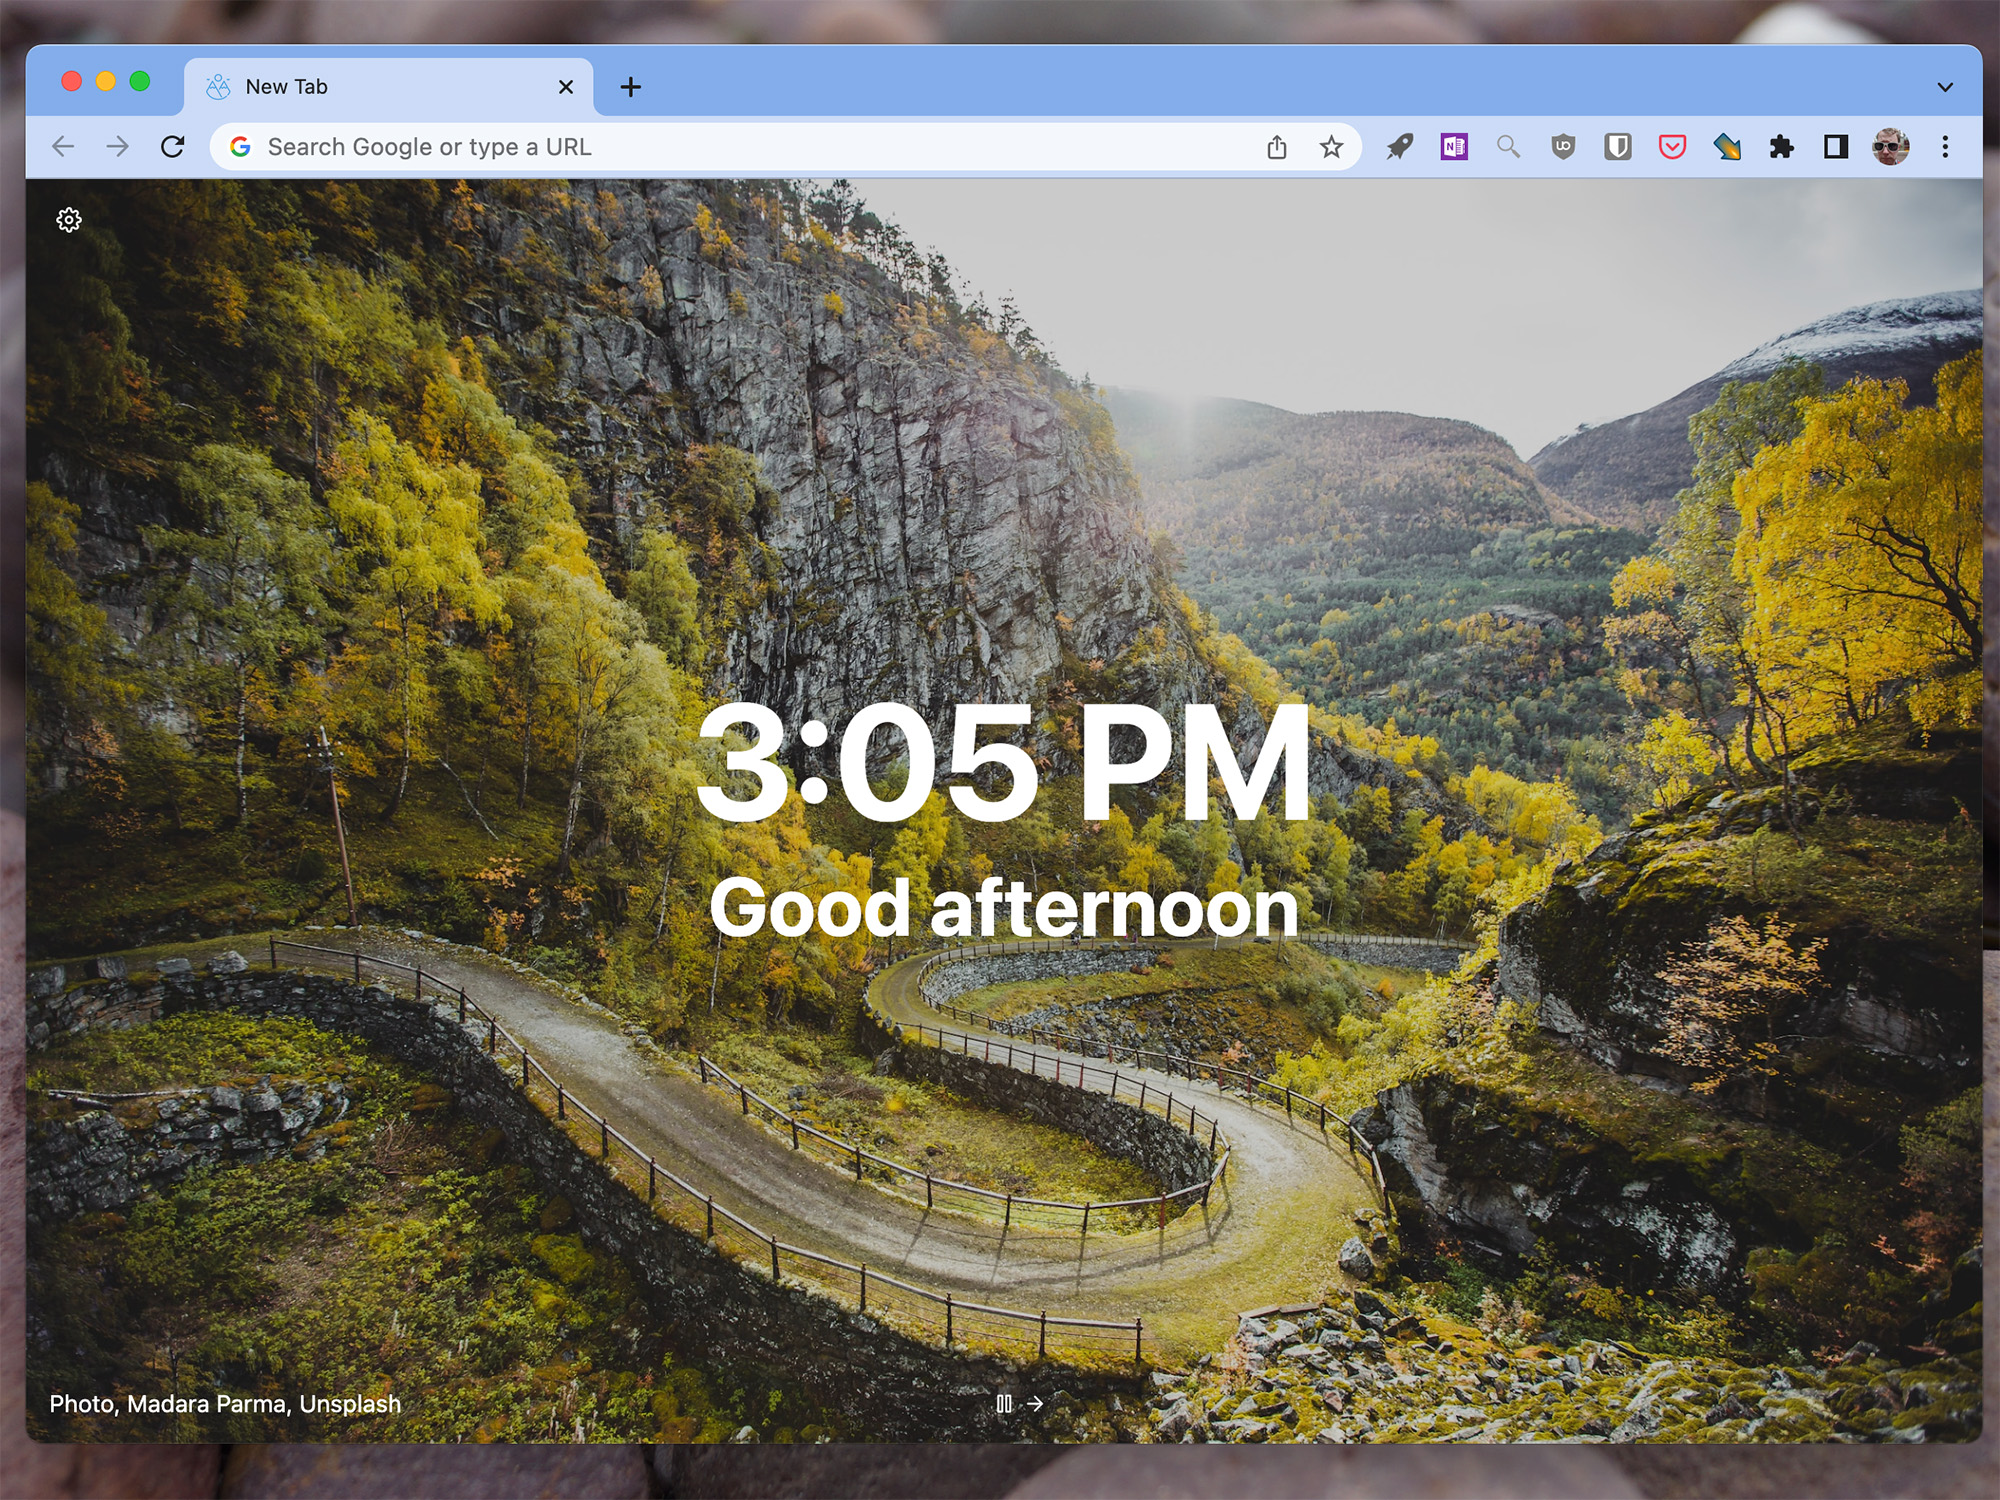 How do you change the new tab page in Chrome?